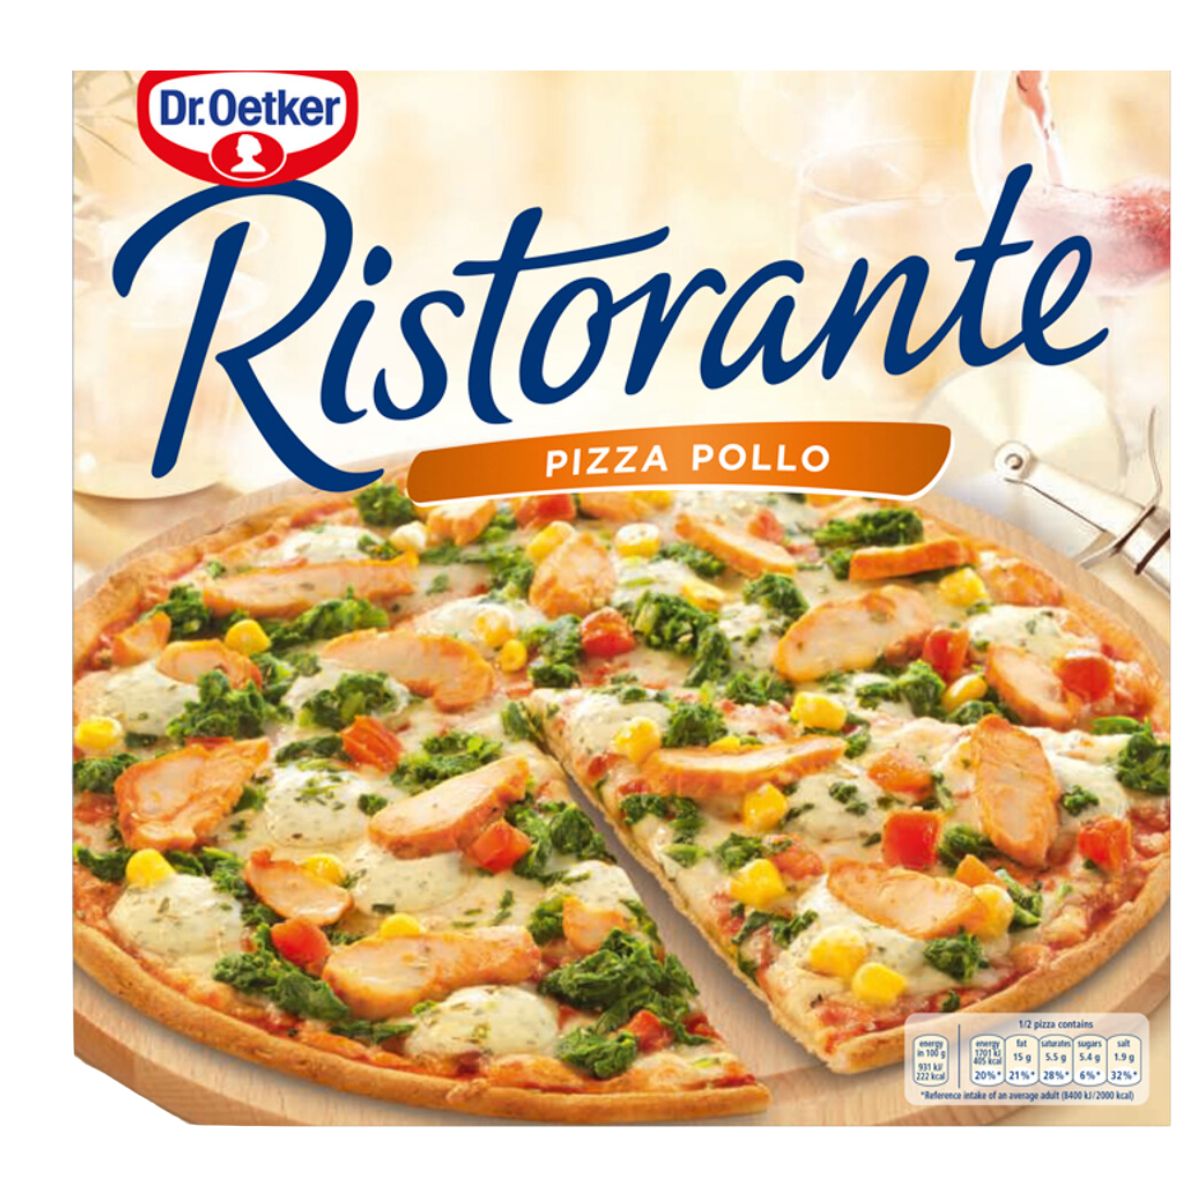 A box of Dr. Oetker - Ristorante Pizza Pollo - 355g with chicken and vegetables on it.